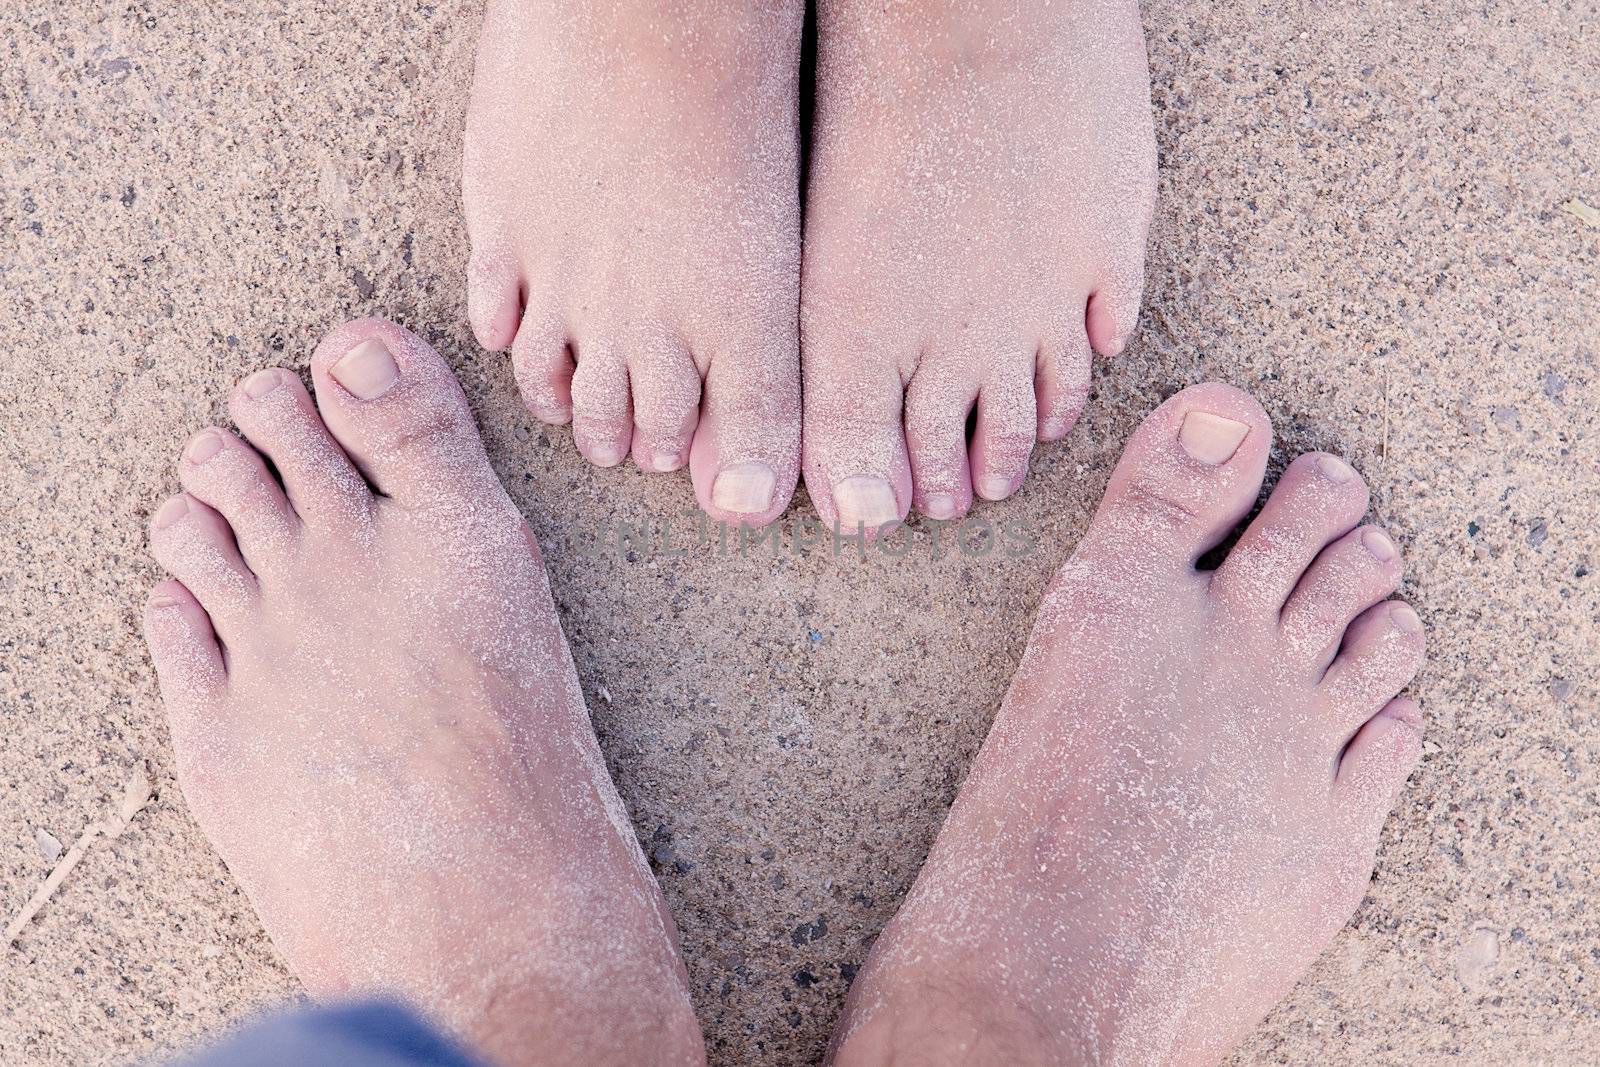 barefoot in sand and water on beach  in summer holidays relaxing